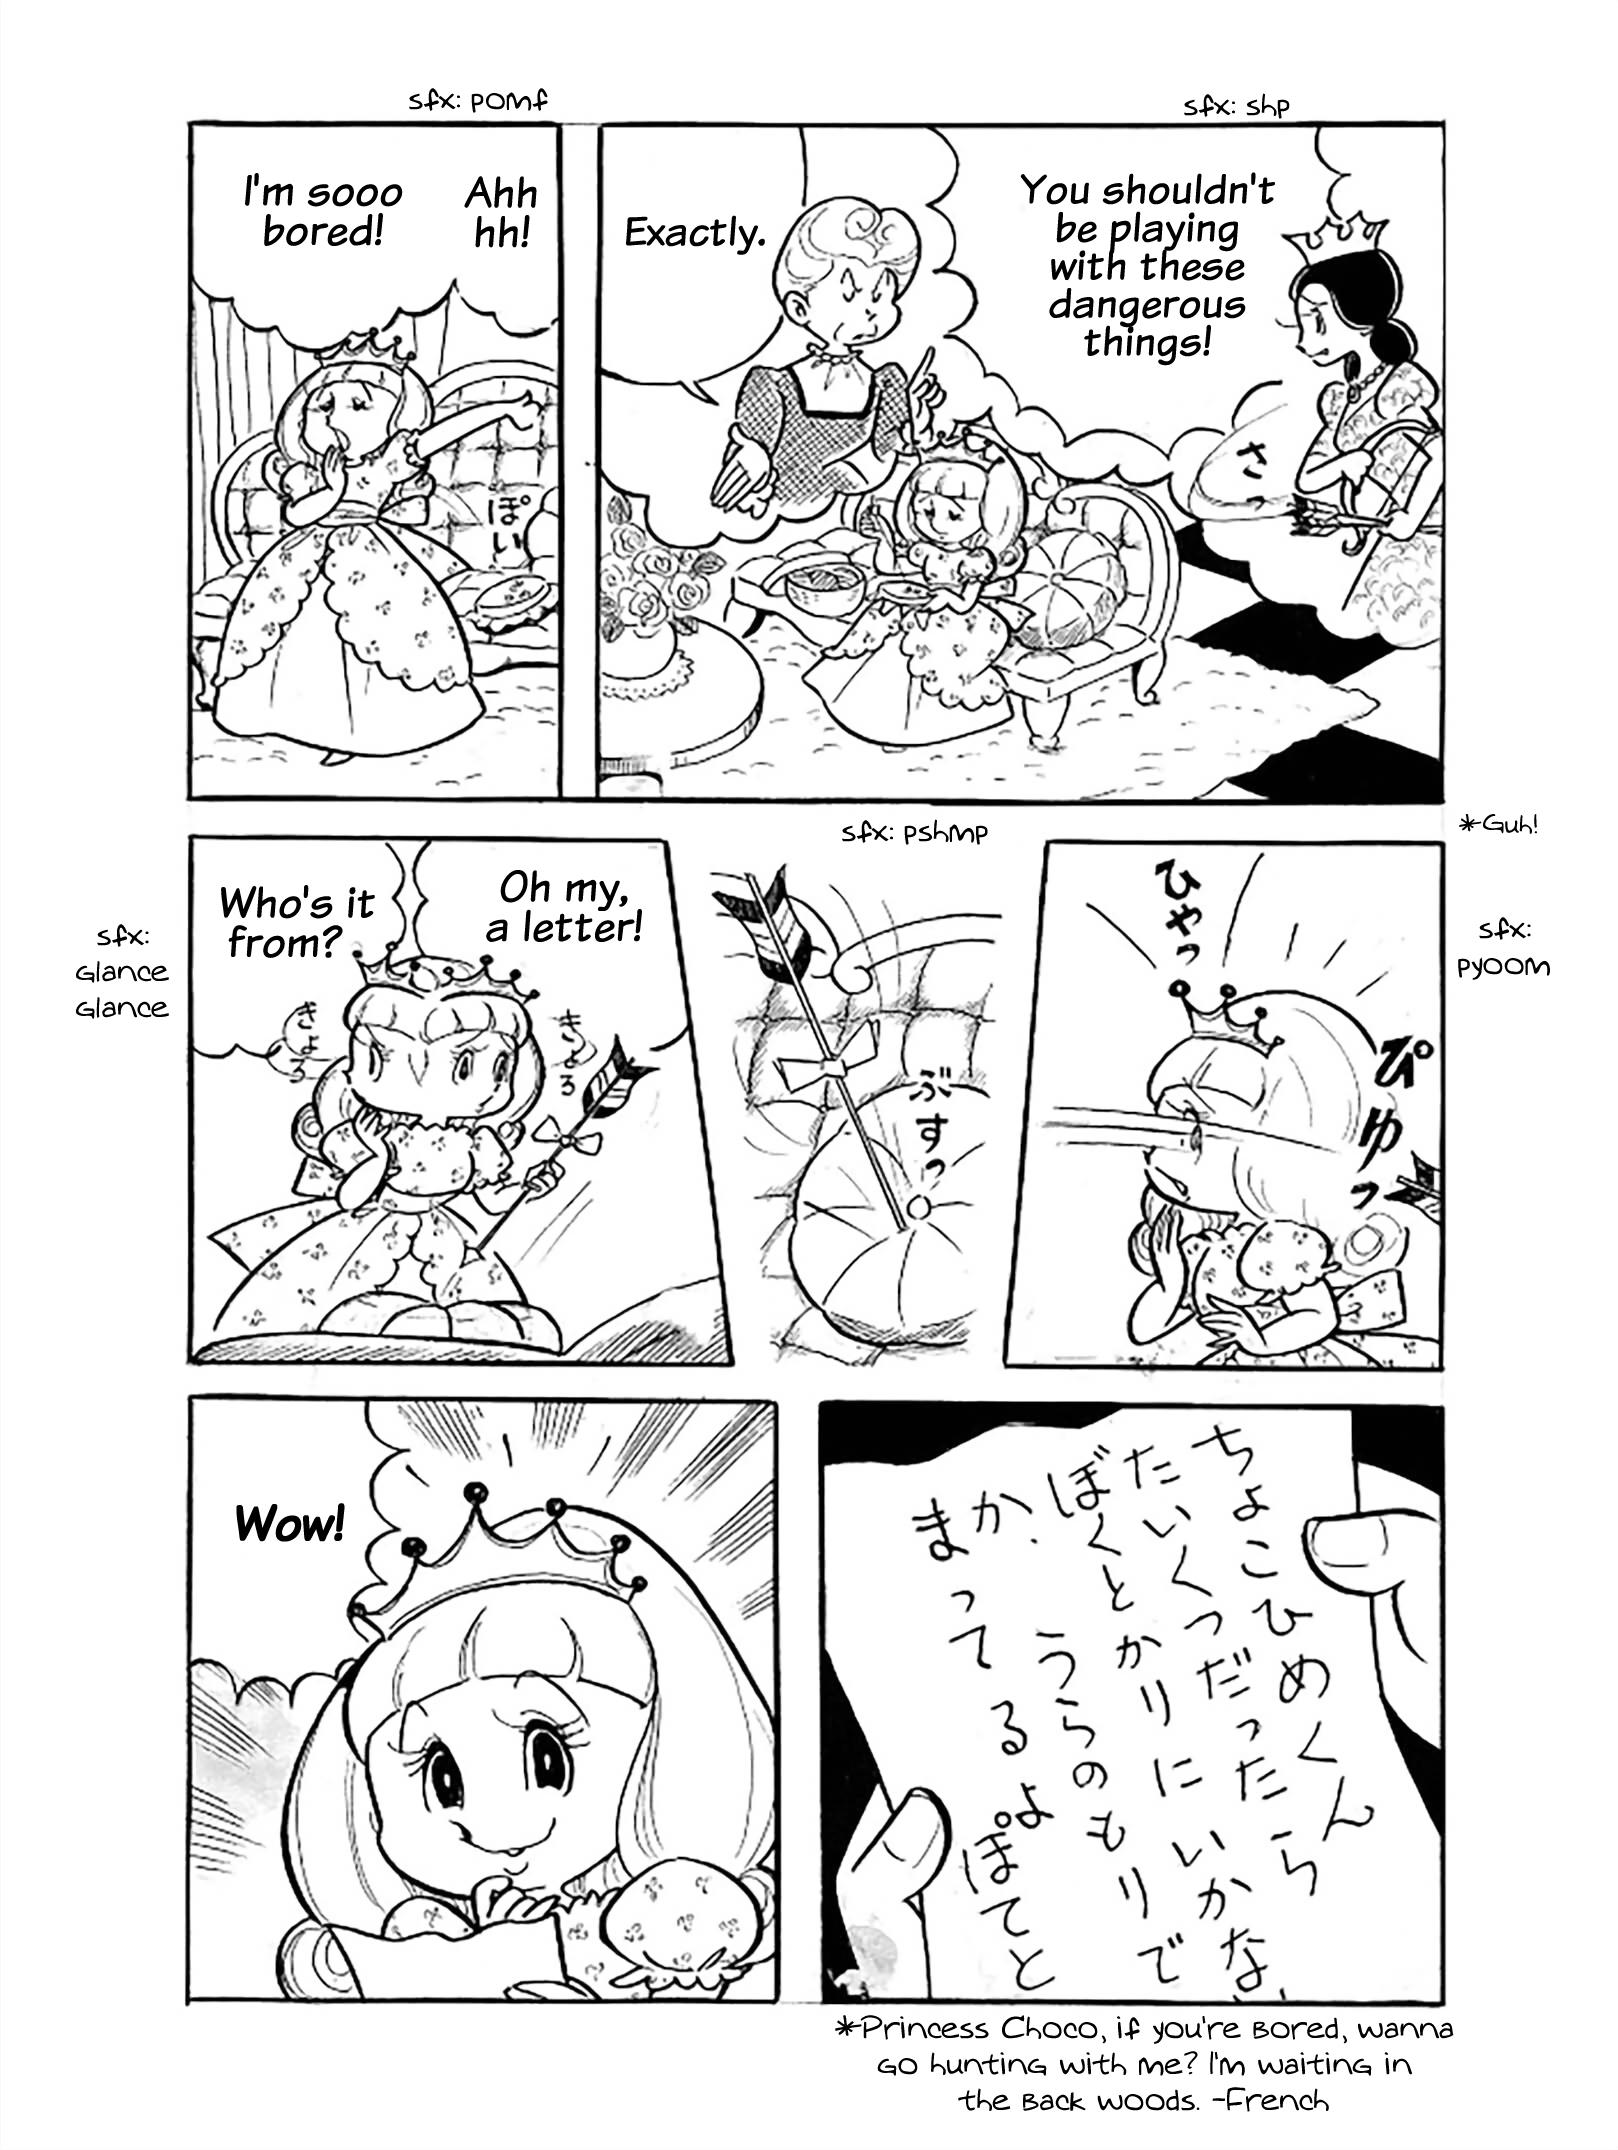 Princess Chokomaka Of Laid-Back Castle Vol.1 Chapter 4: If You're Bored, Let's Go Hunting! - Picture 3